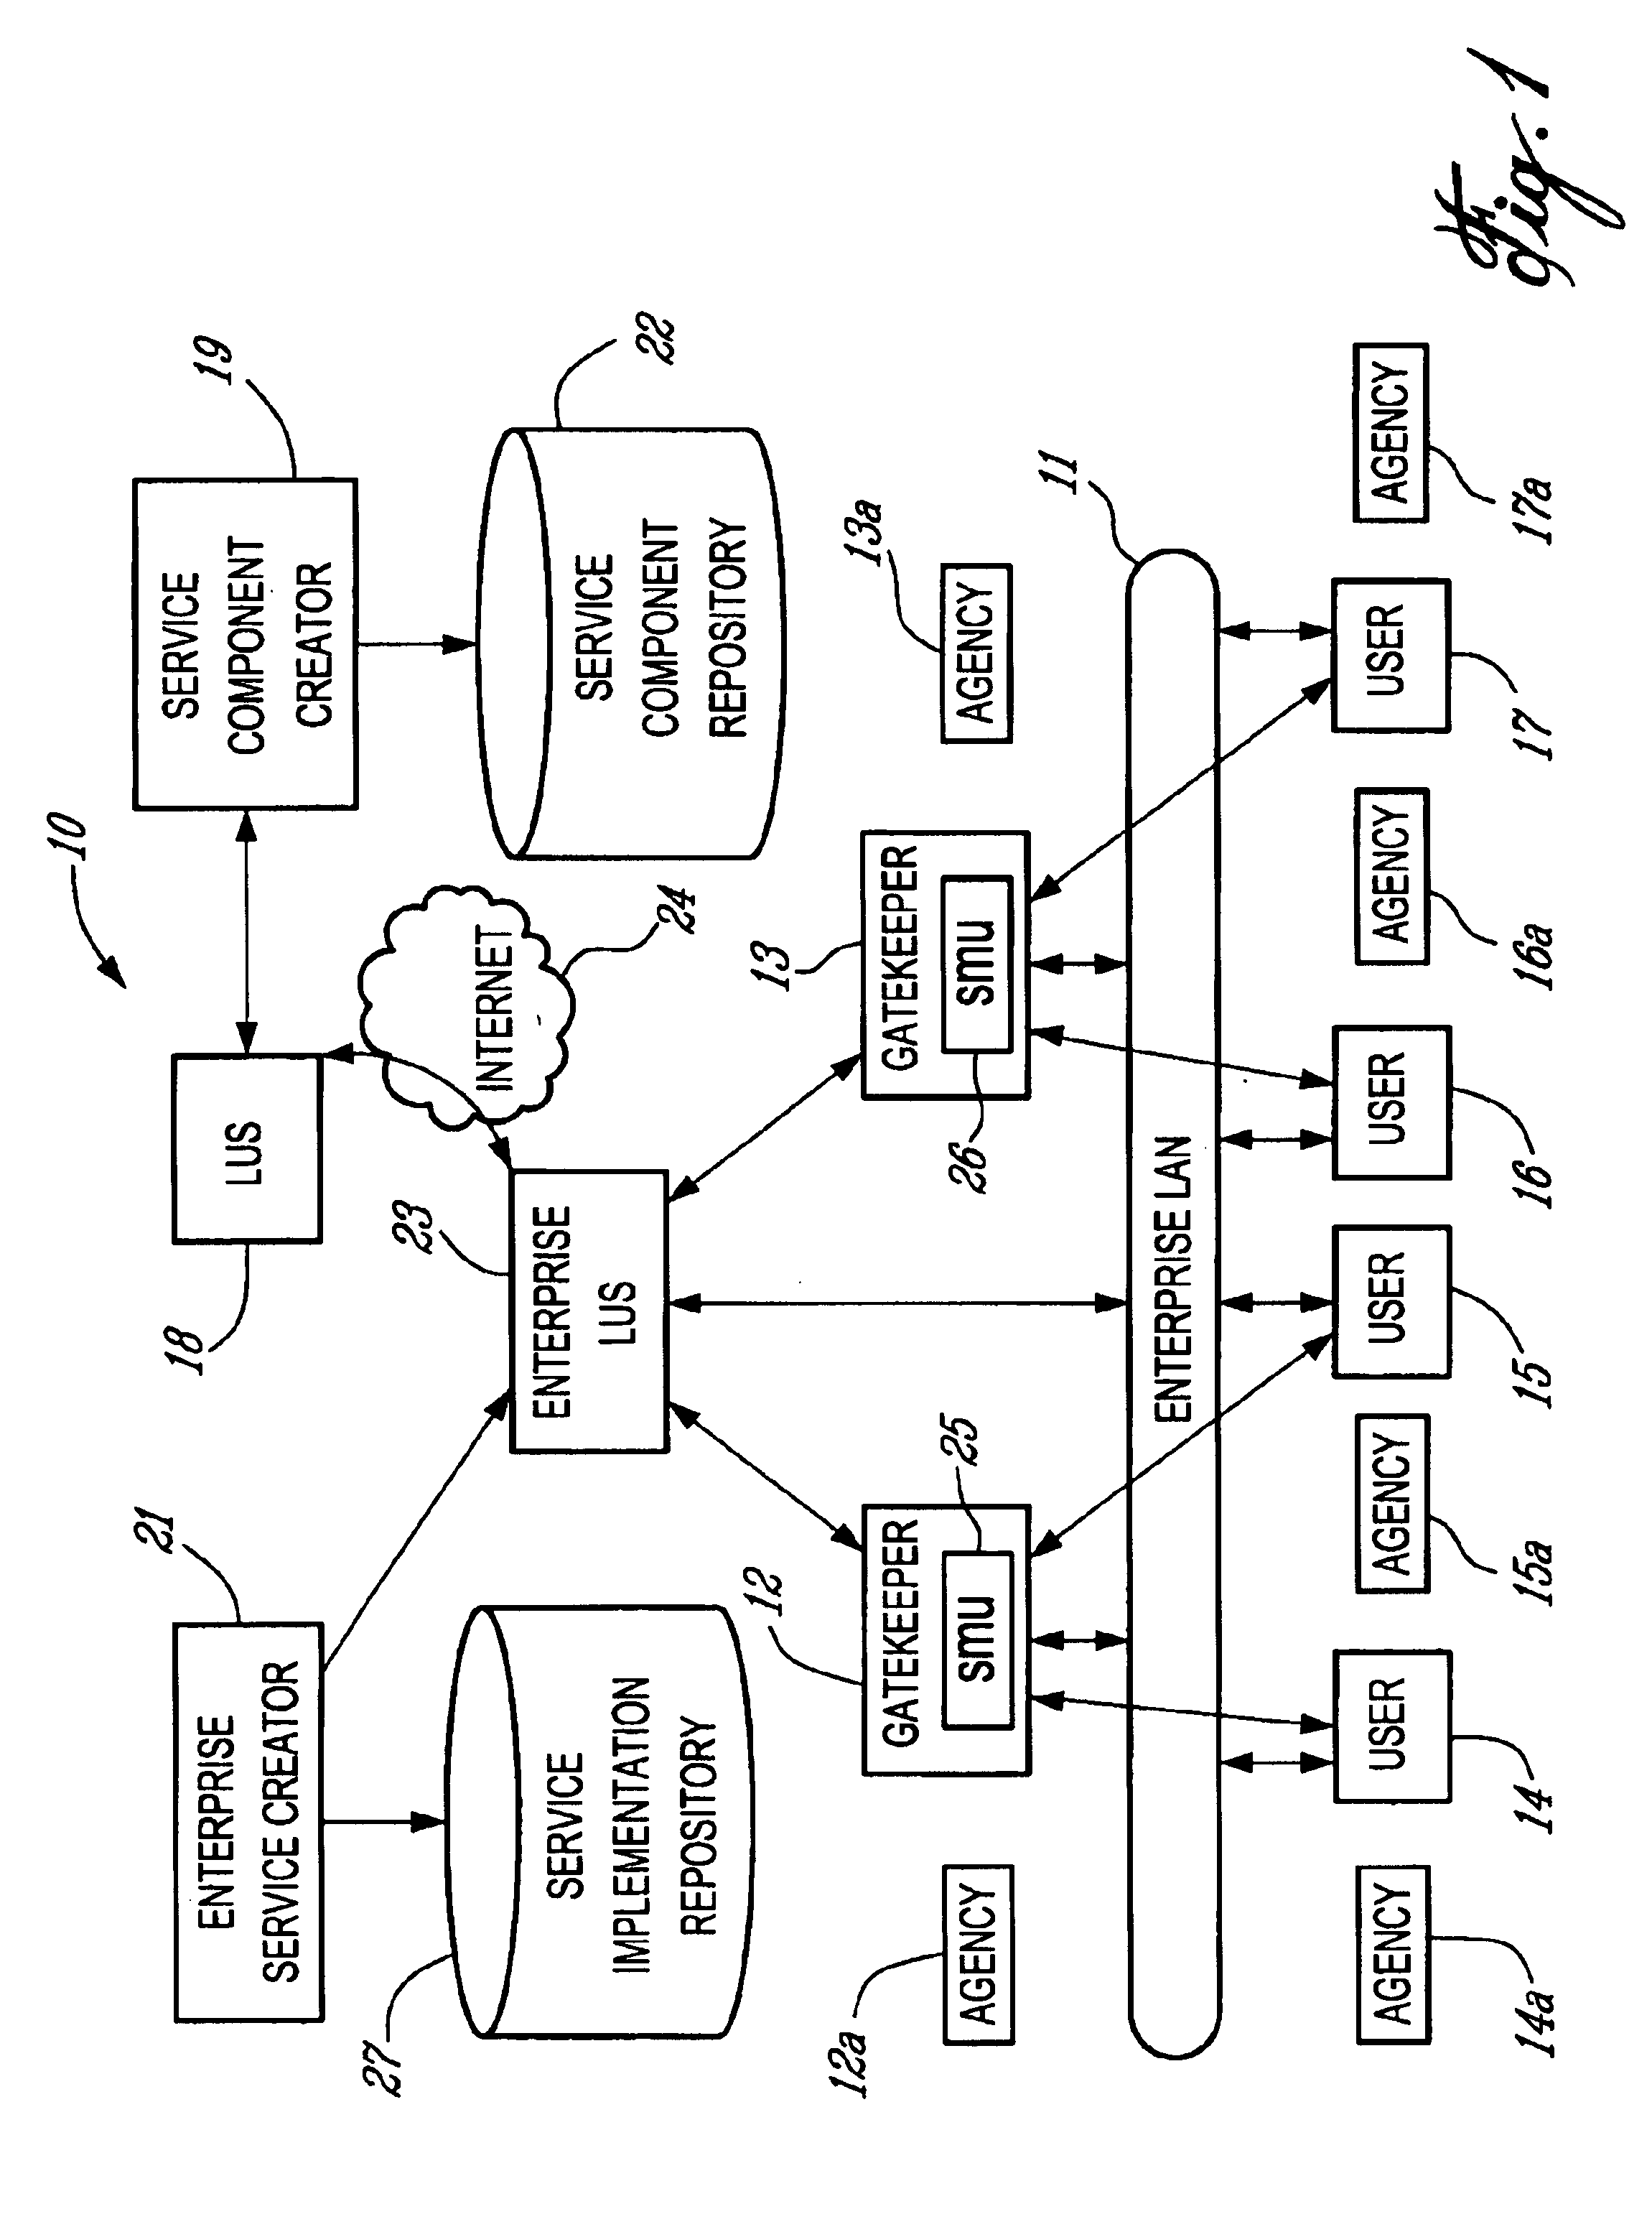 System and method of creating subscriber services in an IP-based telecommunications network